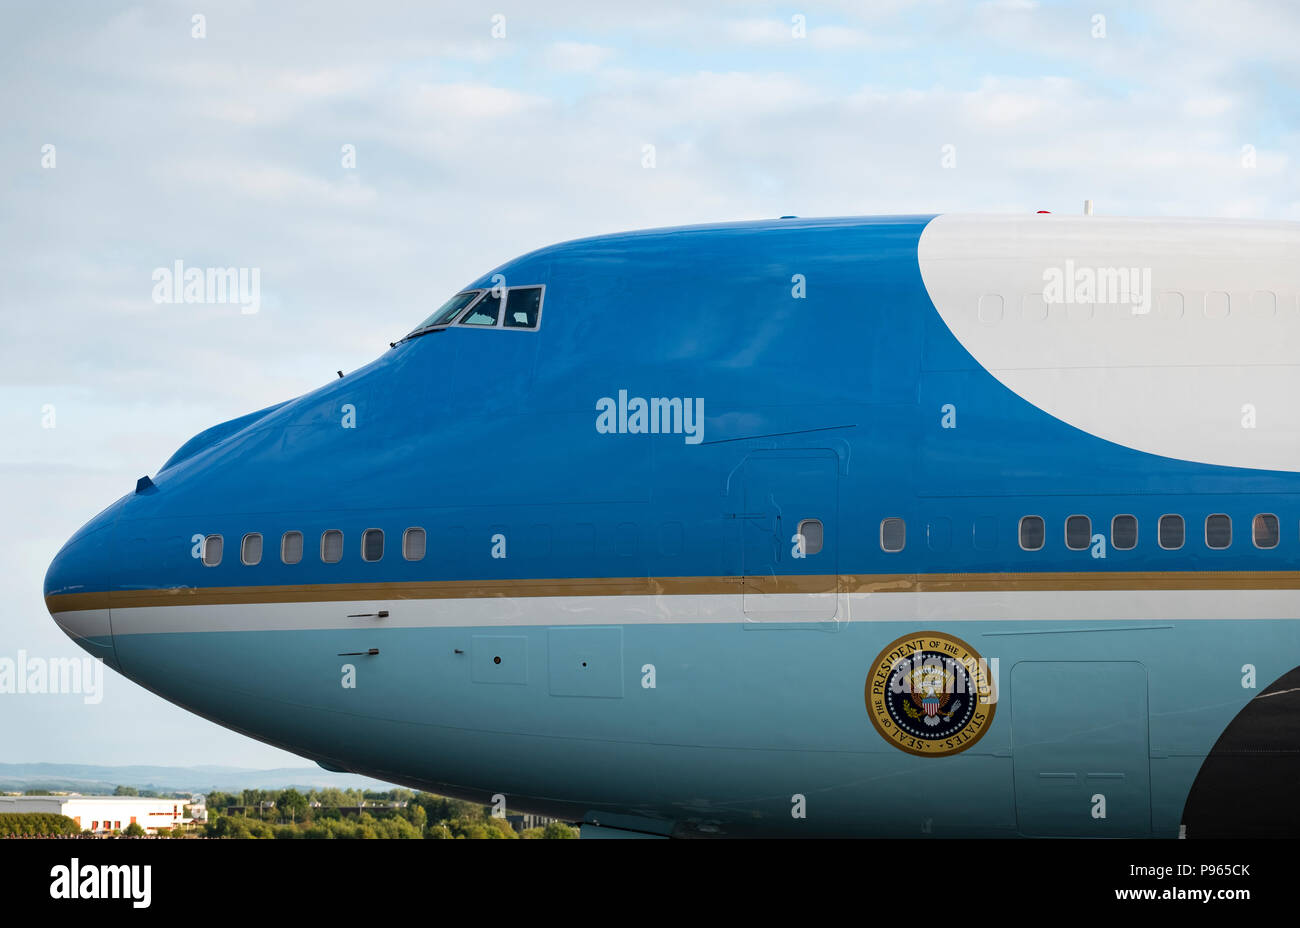 Prestwick Airport, Scotland, UK. 13 July, 2018. President Donald Trump arrives on Air Force One at Prestwick Airport in Ayrshire ahead of a weekend at Stock Photo